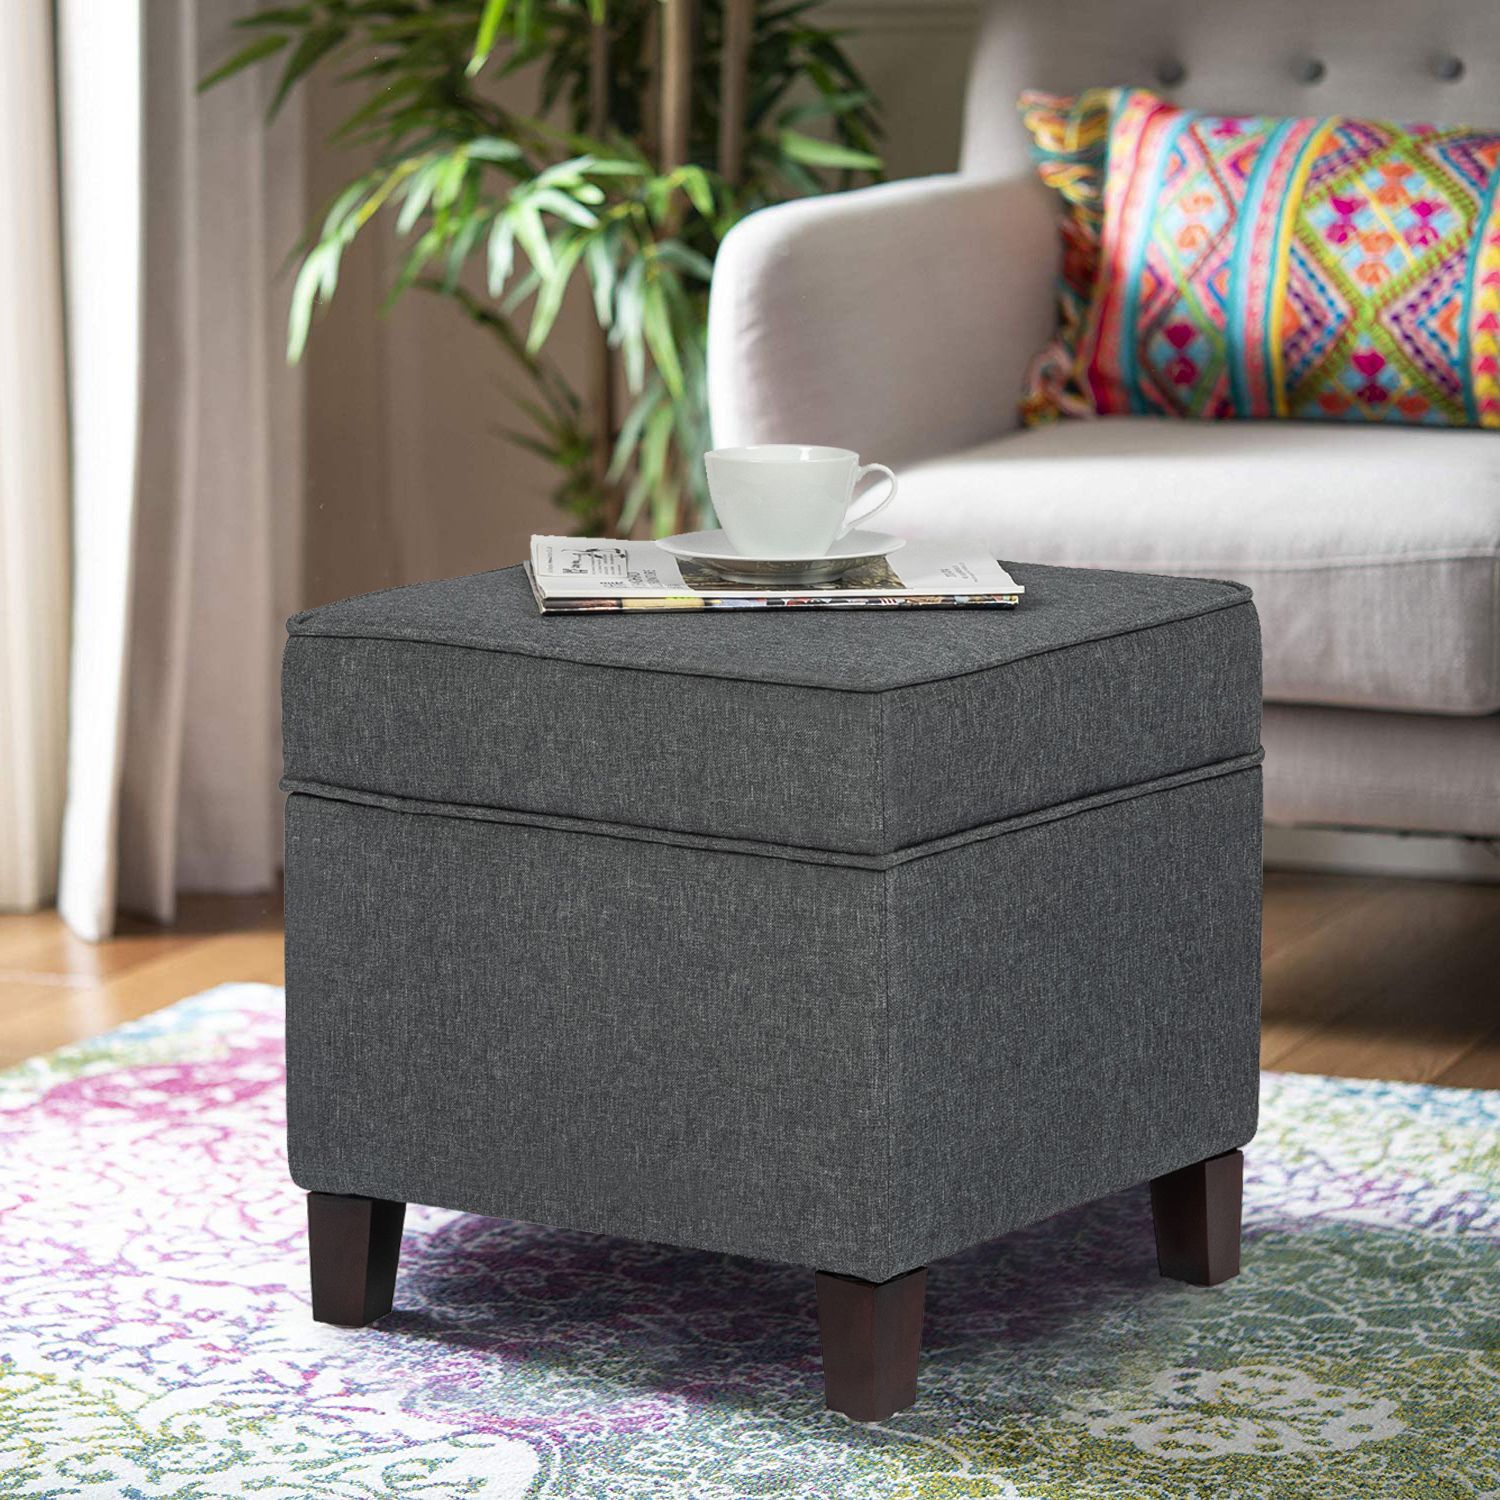 Gray Fabric Oval Ottomans Throughout 2018 Joveco Modern Design Fabric Square Storage Ottoman With Hinge Hidden (View 4 of 10)